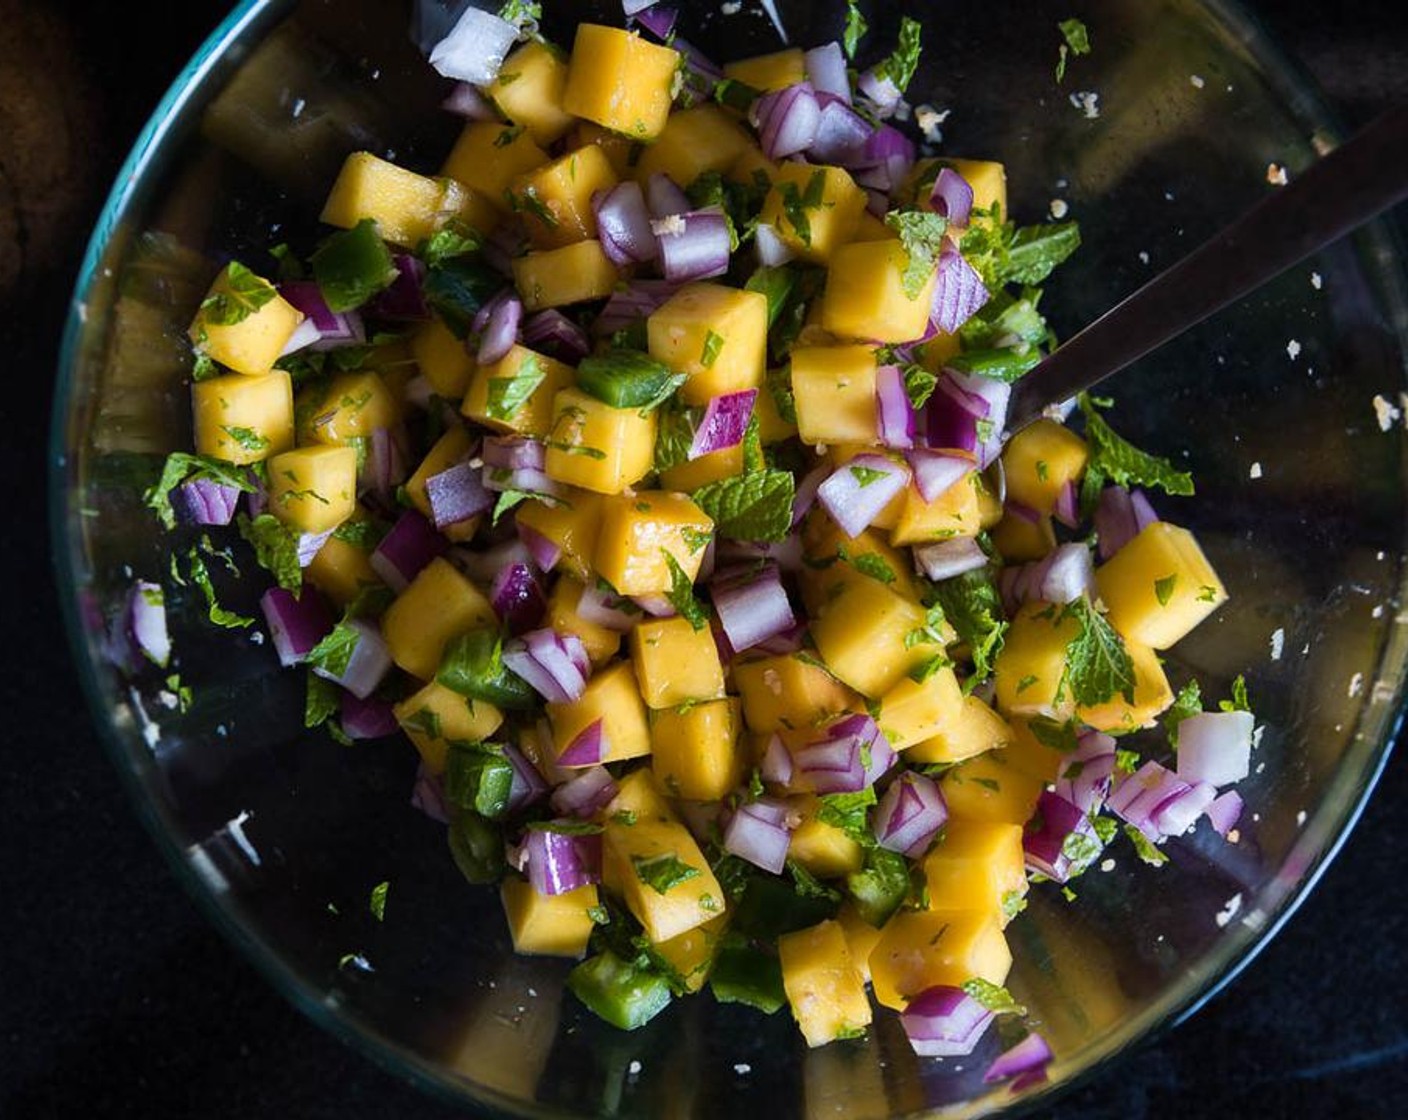 step 4 Prepare mango salsa by combining Mangoes (4 cups), Jalapeño Pepper (1), Red Onions (2 Tbsp), Fresh Mint (1/2 cup), juice from Lime (1/2), Fresh Ginger (1/2 tsp), and Cayenne Pepper (1/8 tsp). Stir to mix well.